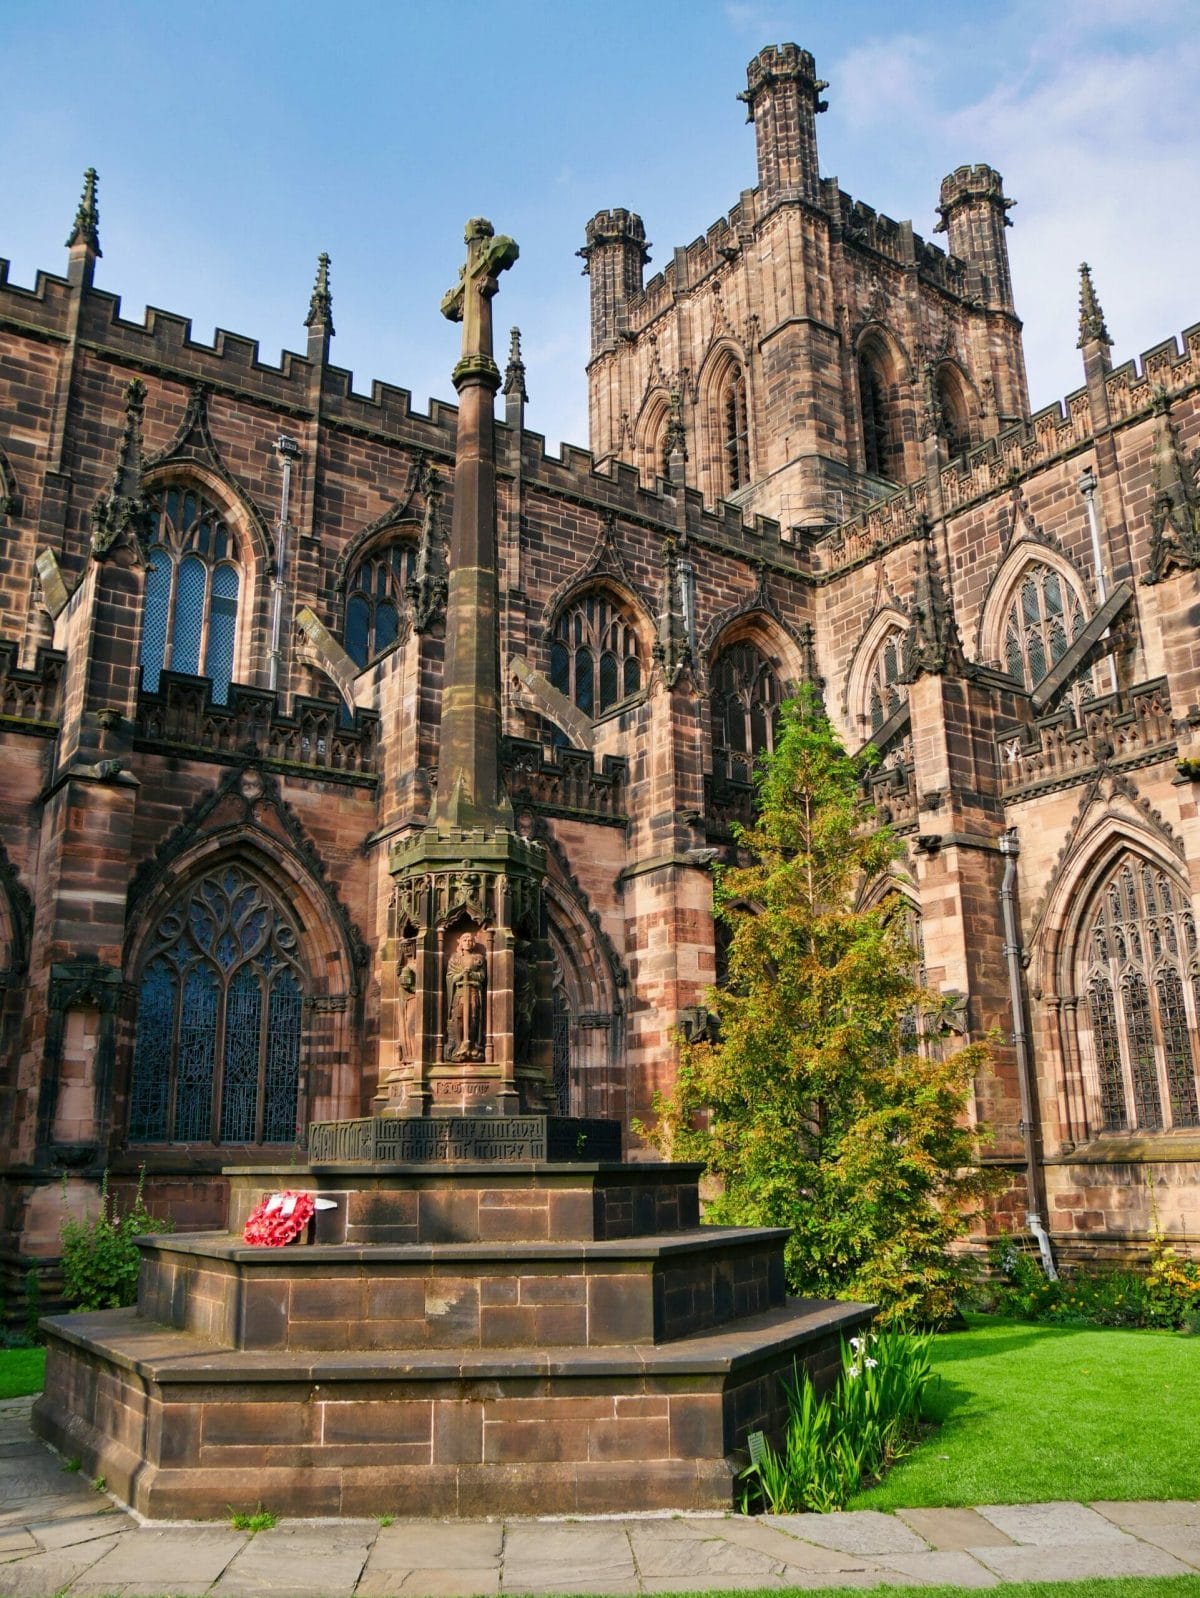 Chester Cathedral with a statue and tree in front